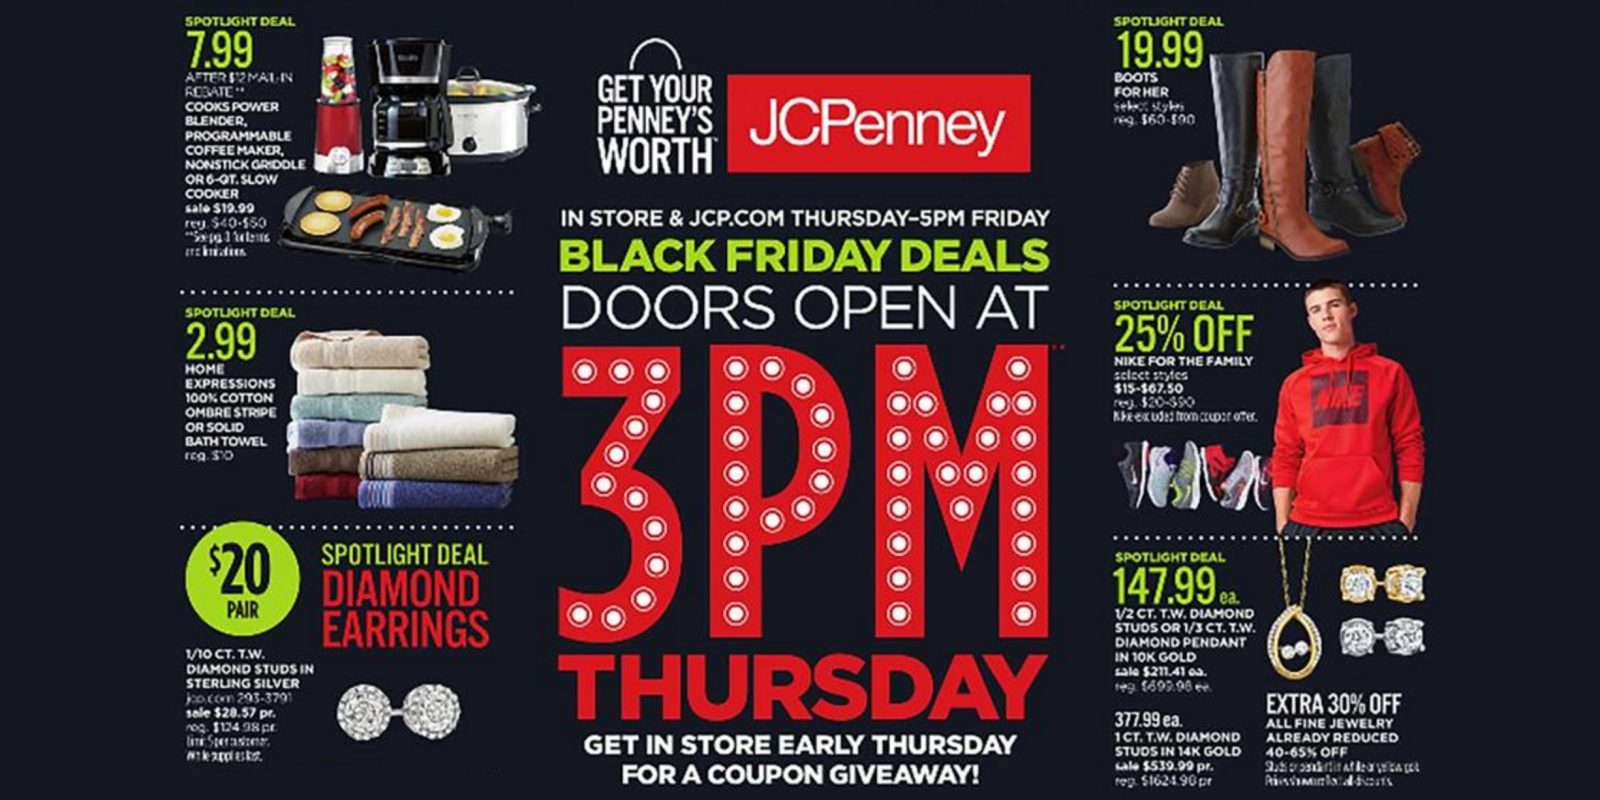 JCPenney Black Friday 2016 Ad: Roku Streaming Stick $35, Bella/Sunbeam appliances $10, more ...